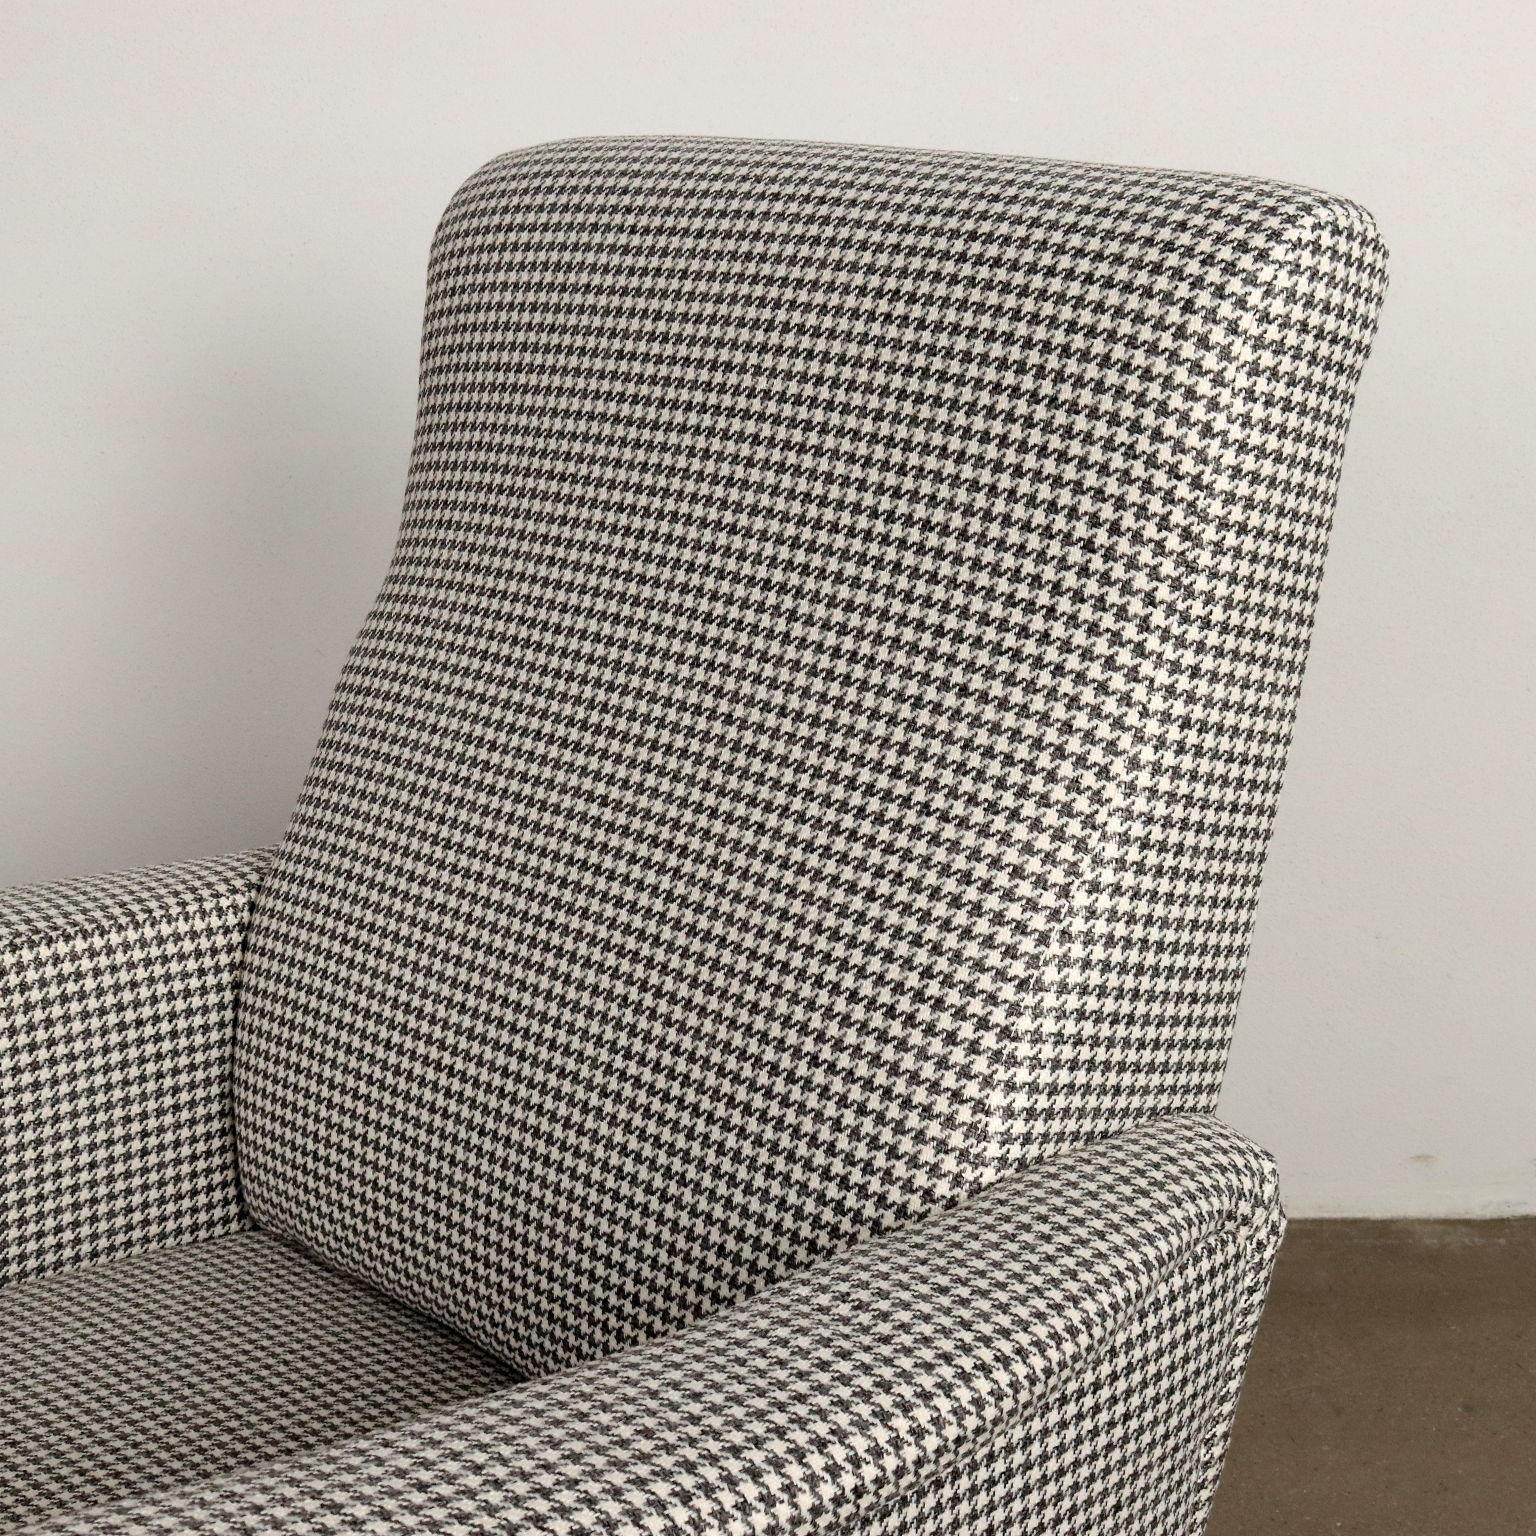 Pair of Houndstooth Armchairs 1950s-1960s In Excellent Condition For Sale In Milano, IT